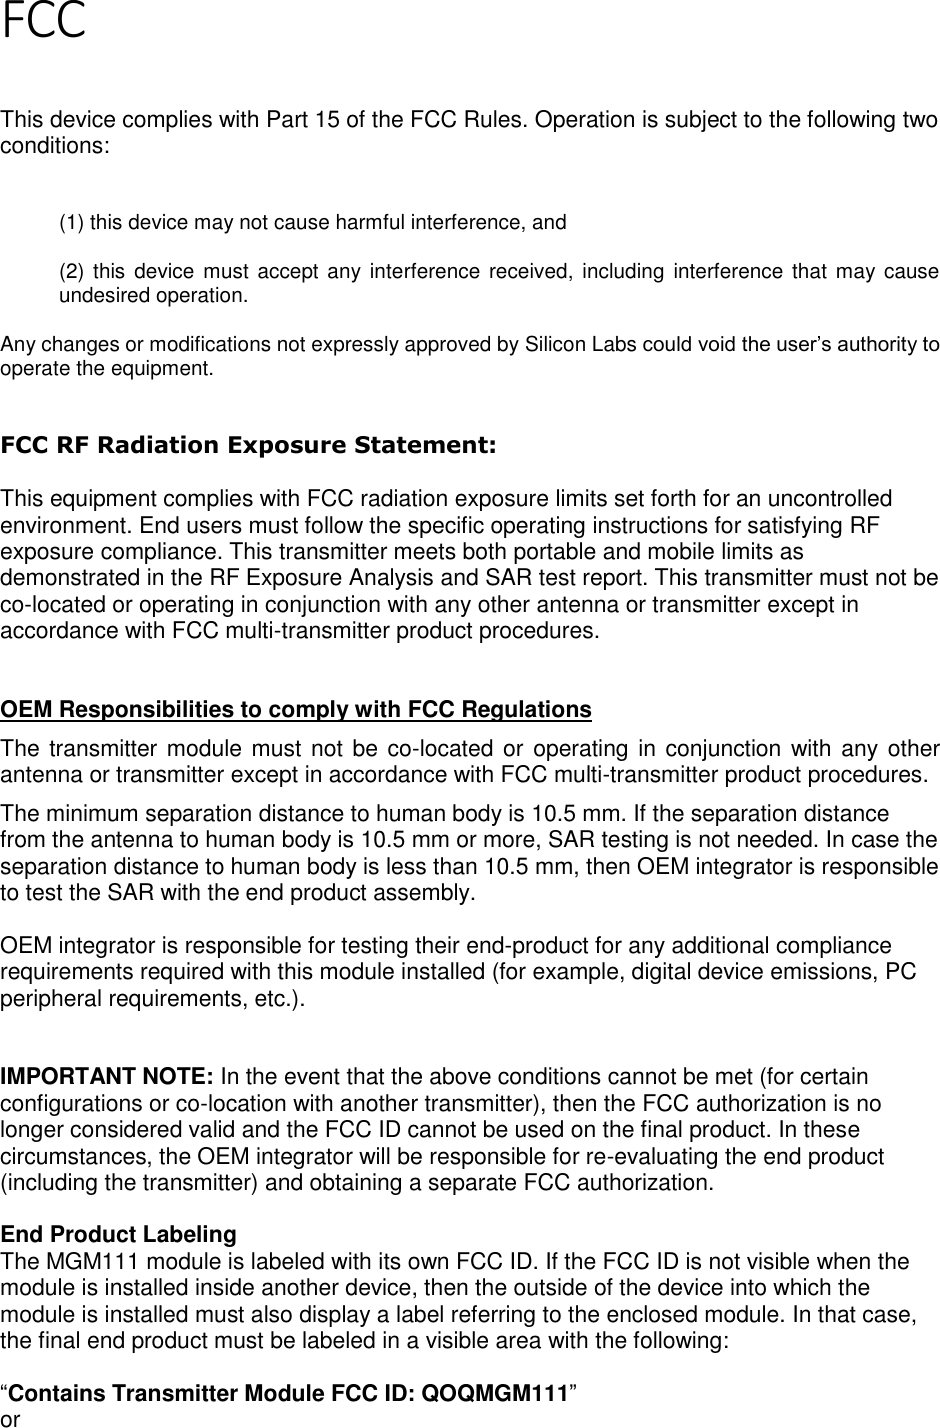 Page 2 of 5 FCC   This device complies with Part 15 of the FCC Rules. Operation is subject to the following two conditions:  (1) this device may not cause harmful interference, and  (2) this device  must accept any interference received,  including interference that may cause undesired operation. Any changes or modifications not expressly approved by Silicon Labs could void the user’s authority to operate the equipment.  FCC RF Radiation Exposure Statement:  This equipment complies with FCC radiation exposure limits set forth for an uncontrolled environment. End users must follow the specific operating instructions for satisfying RF exposure compliance. This transmitter meets both portable and mobile limits as demonstrated in the RF Exposure Analysis and SAR test report. This transmitter must not be co-located or operating in conjunction with any other antenna or transmitter except in accordance with FCC multi-transmitter product procedures.    OEM Responsibilities to comply with FCC Regulations The transmitter module must not be co-located or operating in conjunction with any other antenna or transmitter except in accordance with FCC multi-transmitter product procedures.  The minimum separation distance to human body is 10.5 mm. If the separation distance from the antenna to human body is 10.5 mm or more, SAR testing is not needed. In case the separation distance to human body is less than 10.5 mm, then OEM integrator is responsible to test the SAR with the end product assembly.   OEM integrator is responsible for testing their end-product for any additional compliance requirements required with this module installed (for example, digital device emissions, PC peripheral requirements, etc.).   IMPORTANT NOTE: In the event that the above conditions cannot be met (for certain configurations or co-location with another transmitter), then the FCC authorization is no longer considered valid and the FCC ID cannot be used on the final product. In these circumstances, the OEM integrator will be responsible for re-evaluating the end product (including the transmitter) and obtaining a separate FCC authorization.  End Product Labeling The MGM111 module is labeled with its own FCC ID. If the FCC ID is not visible when the module is installed inside another device, then the outside of the device into which the module is installed must also display a label referring to the enclosed module. In that case, the final end product must be labeled in a visible area with the following:   “Contains Transmitter Module FCC ID: QOQMGM111” or  